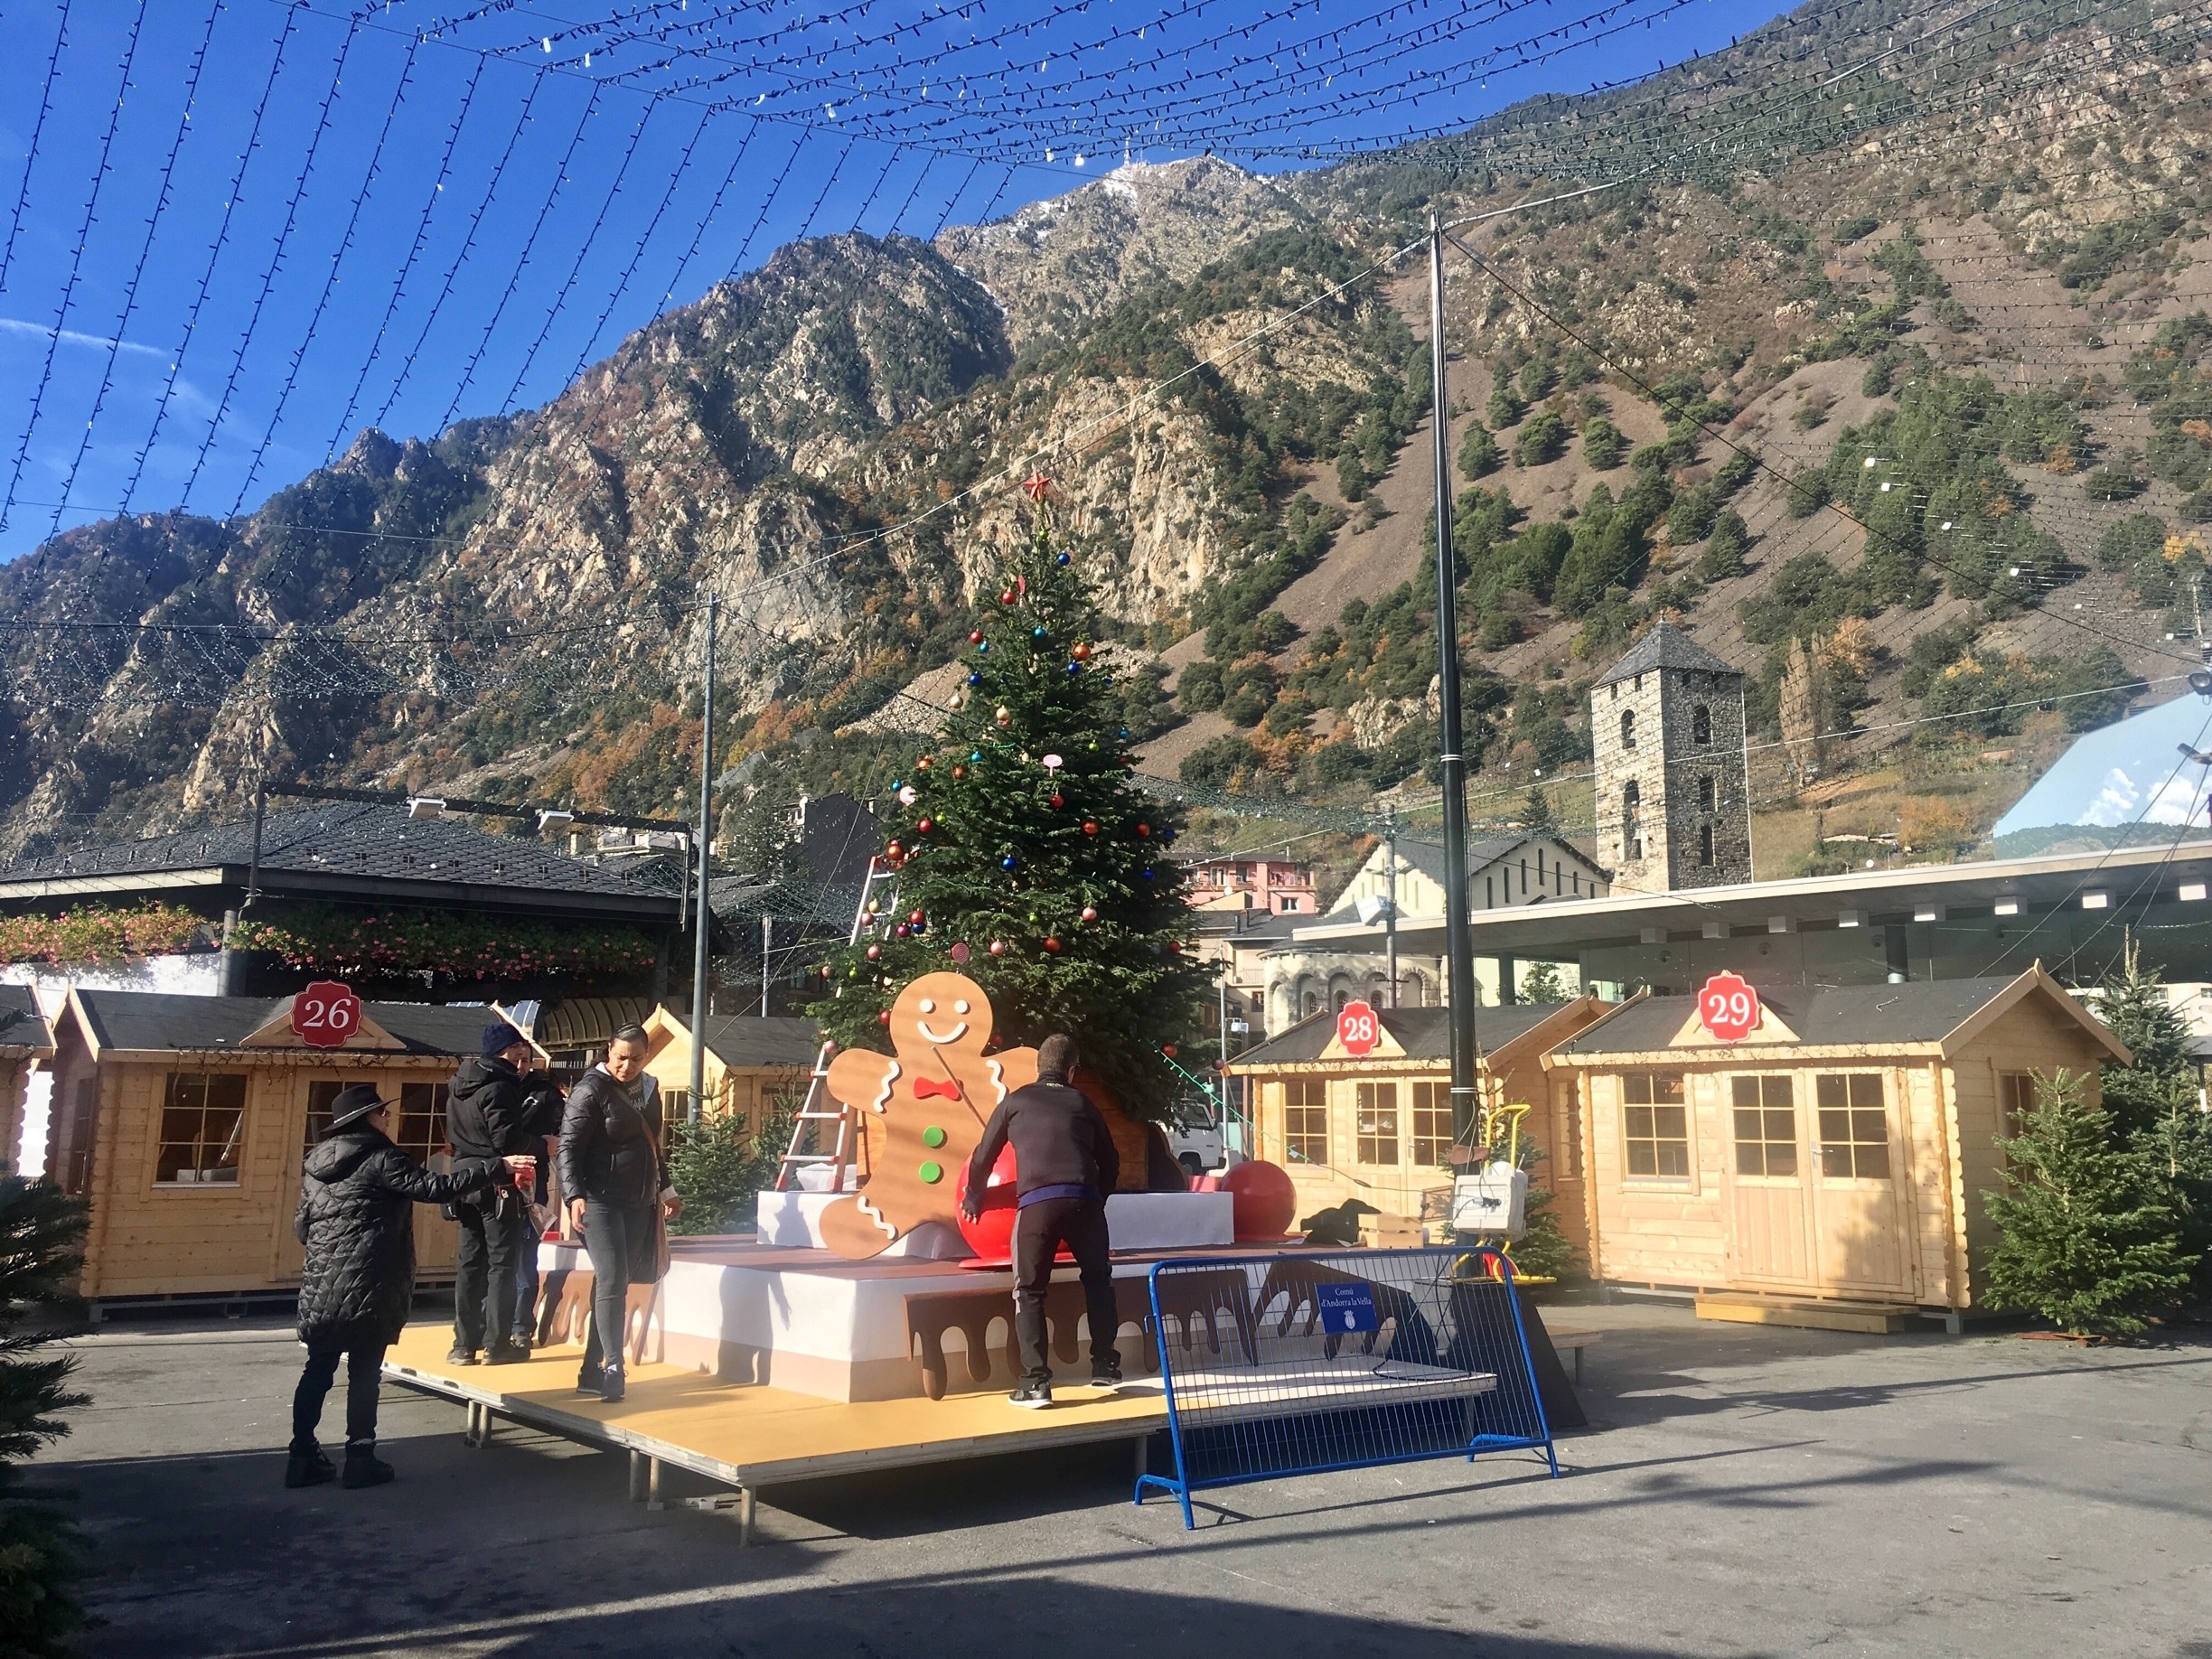 Bon Nadal Andorra la Vella! Folks in the highest capital city in Europe gear up for the opening of the Christmas Market this weekend: https://wp.me/p7CVI8-1Iw

#ChristmasMarket #BonNadal #Andorra #AndorraLaVella #Pyrenees